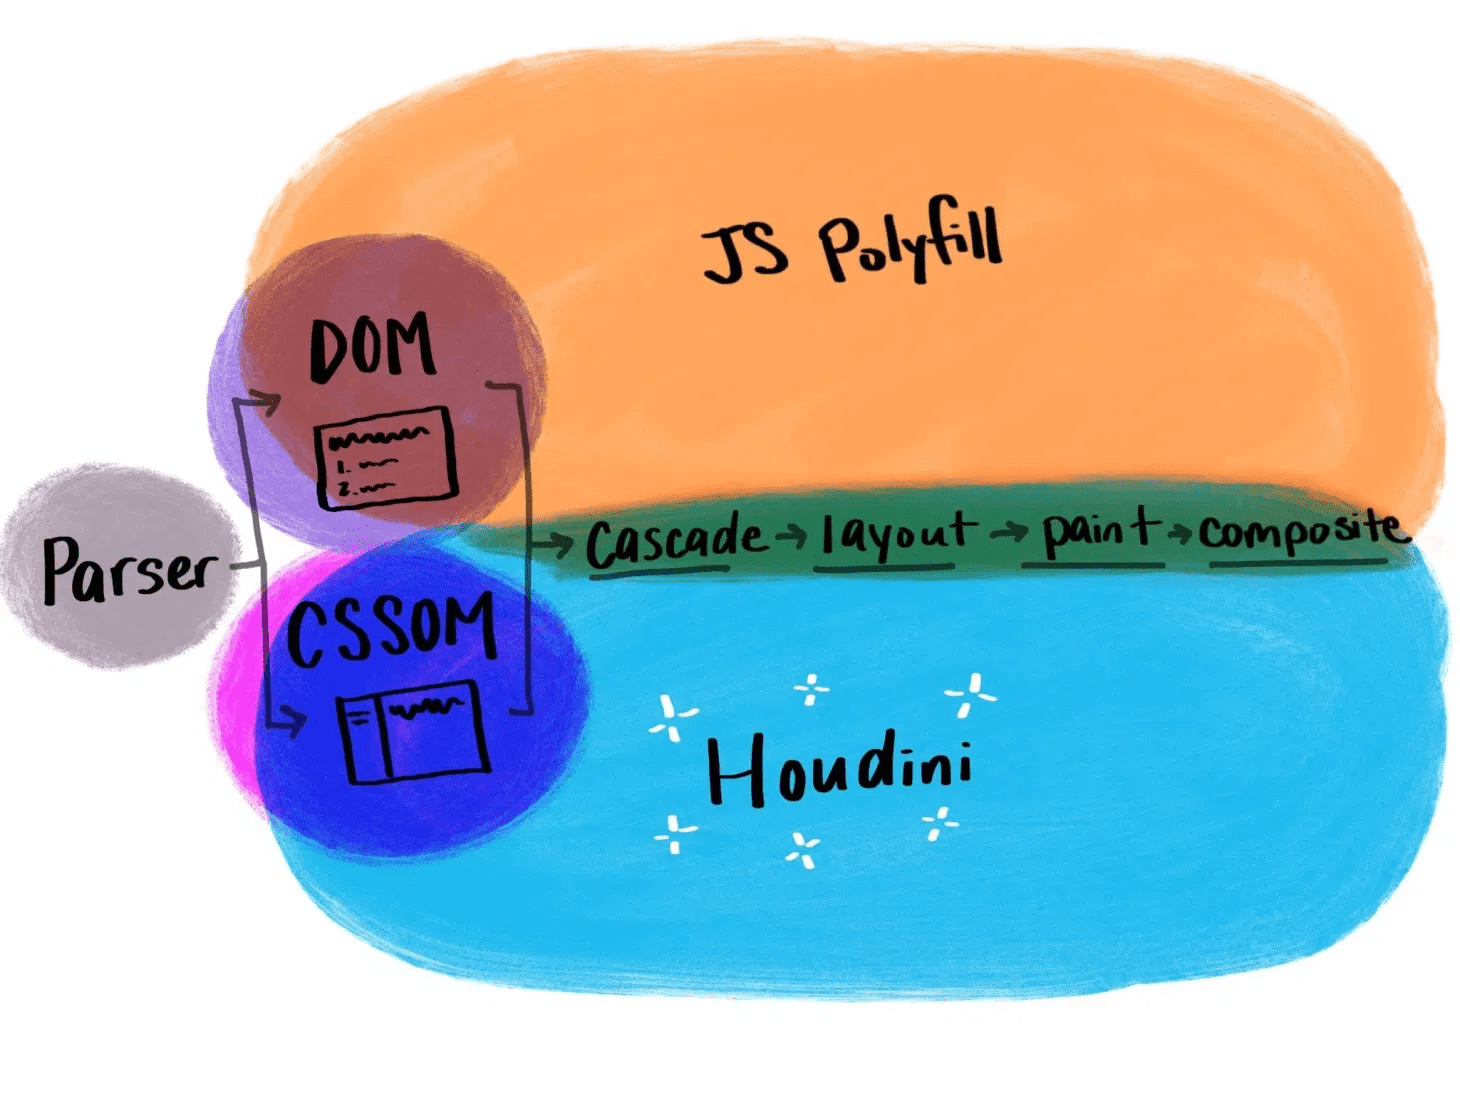 Illustration showing how Houdini works compared to traditional JavaScript polyfills.